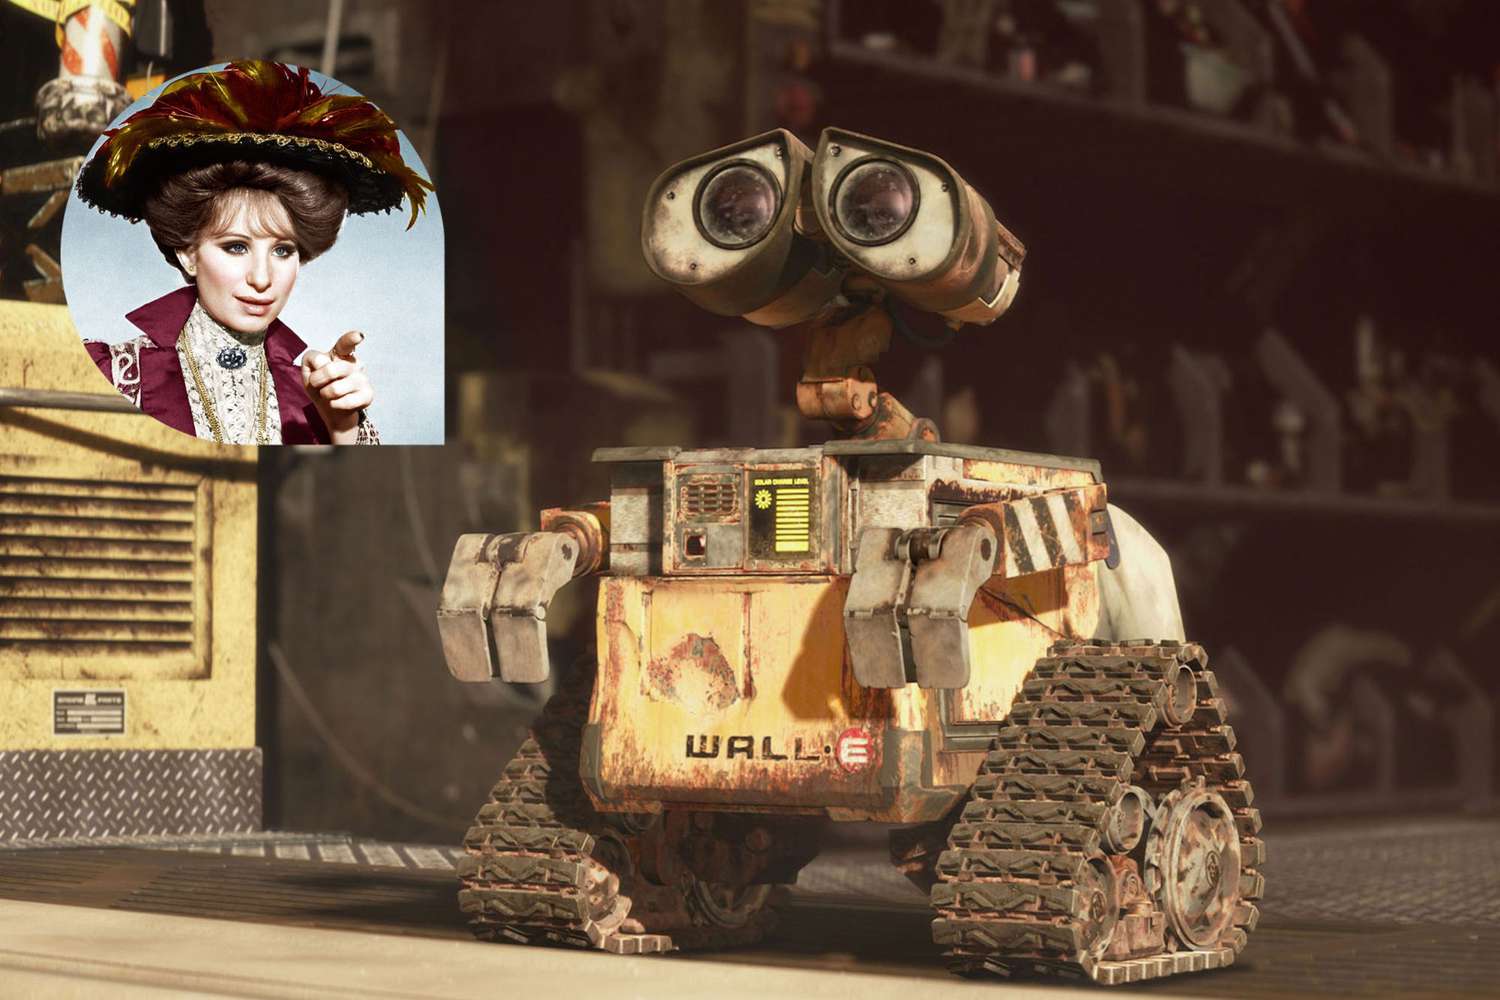 WALL-E director Andrew Stanton explains the Hello Dolly connection 